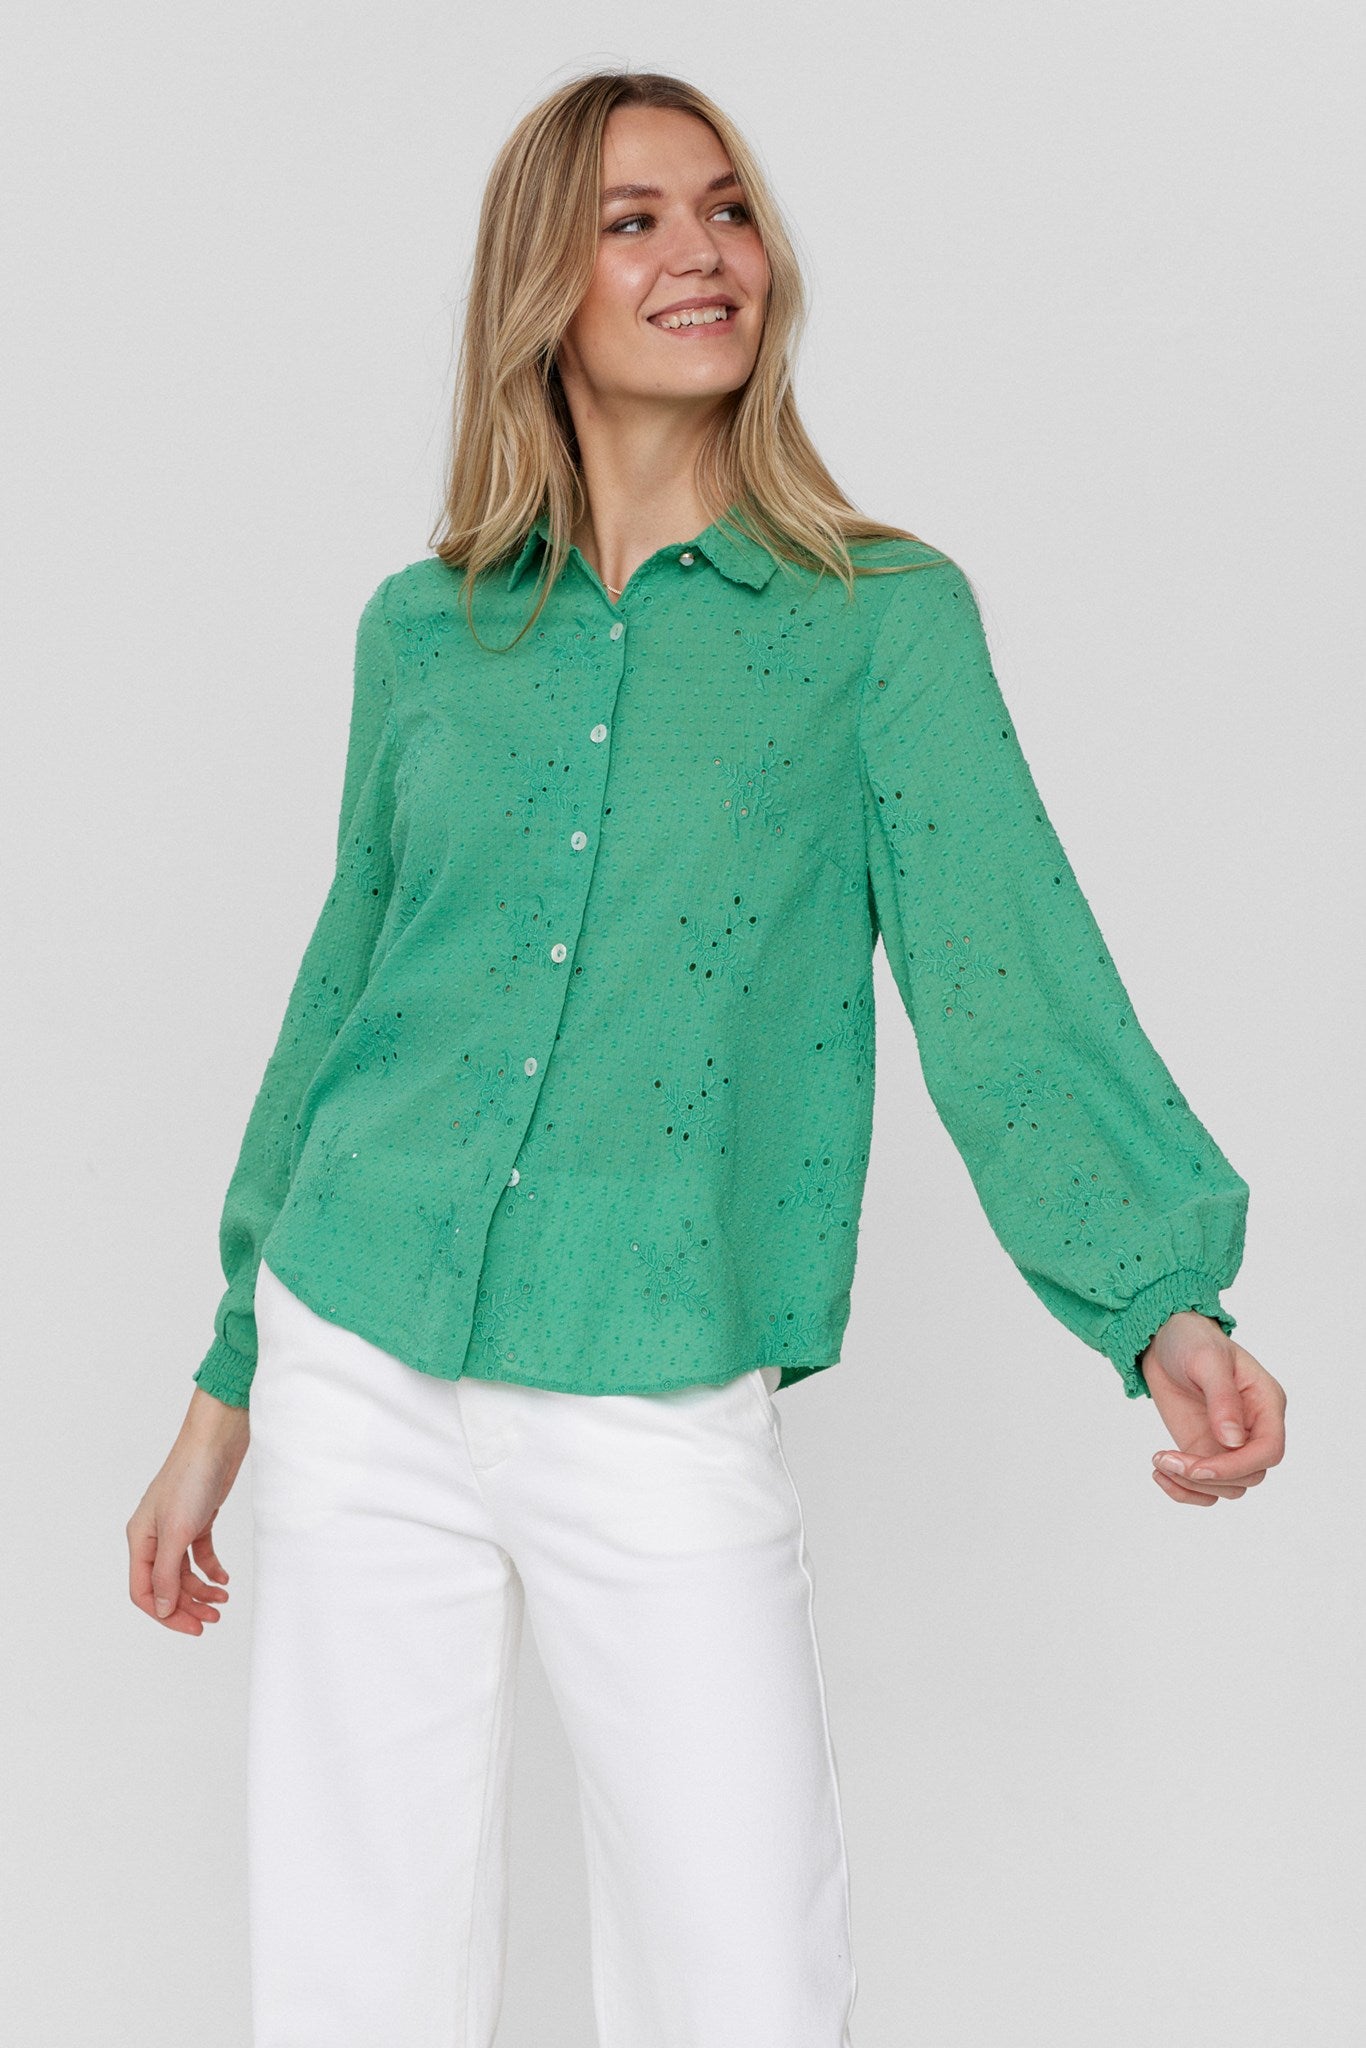 Shirts ⇒ See our selection of stylish shirts for women| NÜMPH